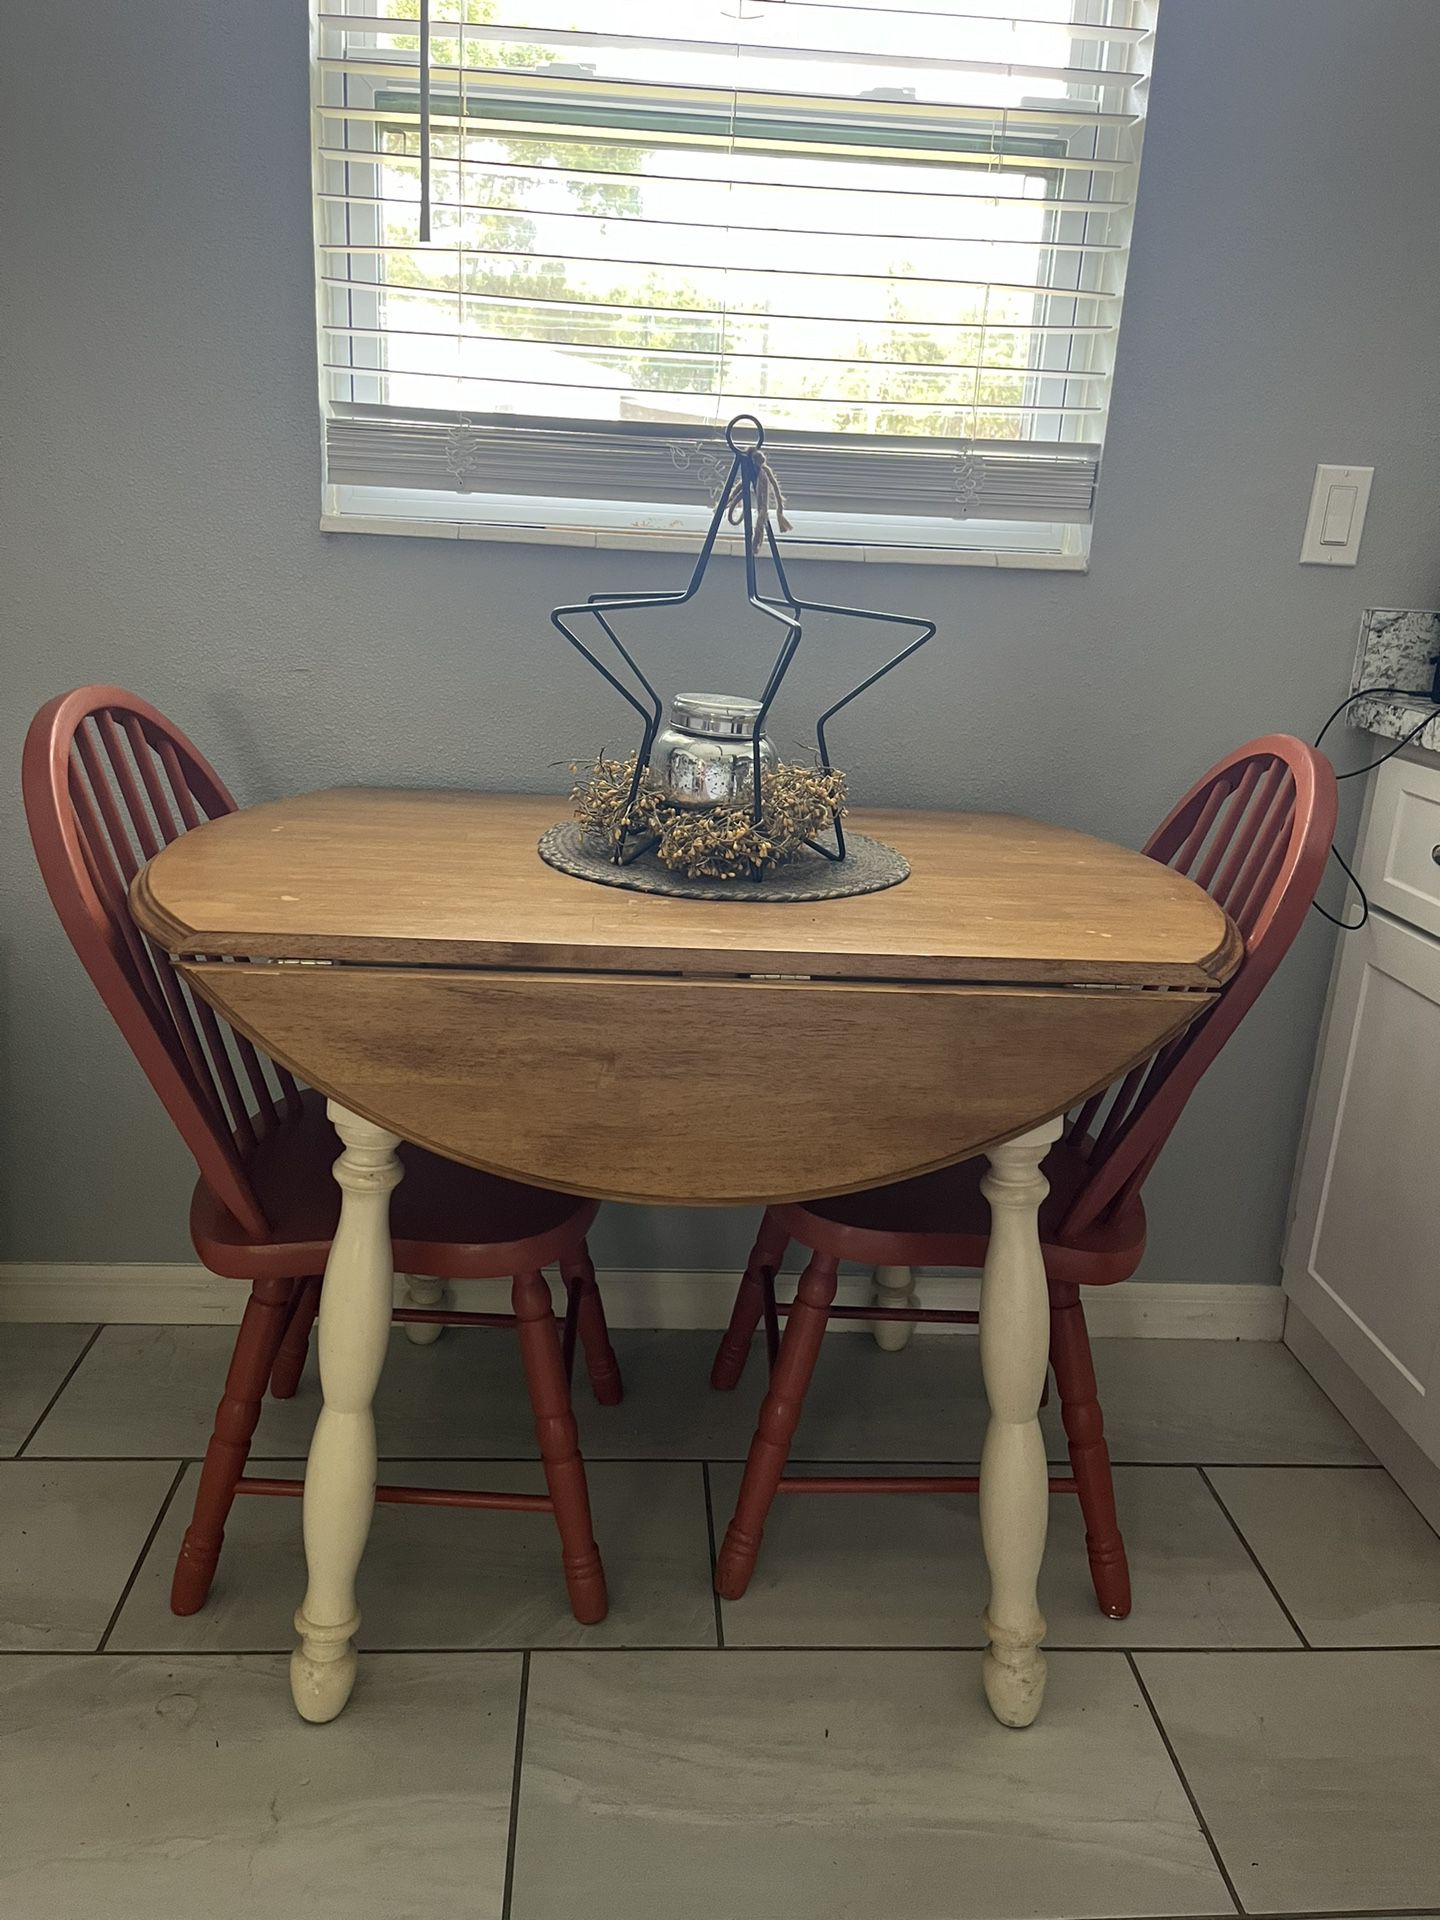 Ashley Furniture Breakfast Table & 3 Chairs 